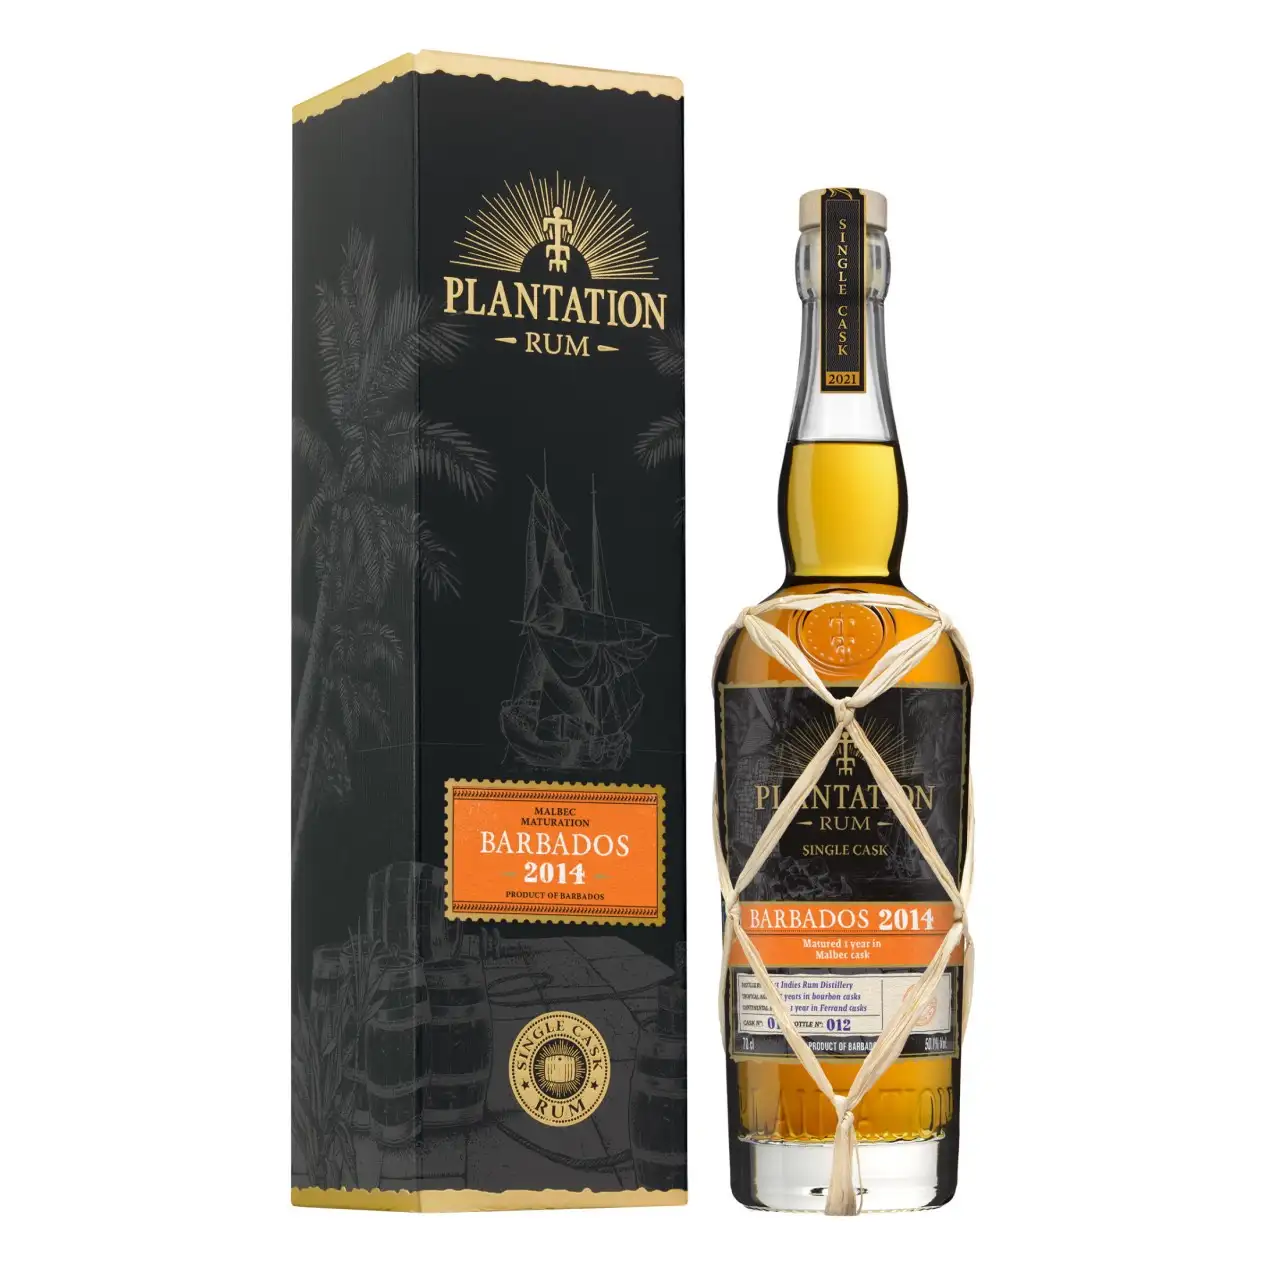 Image of the front of the bottle of the rum Plantation Barbados